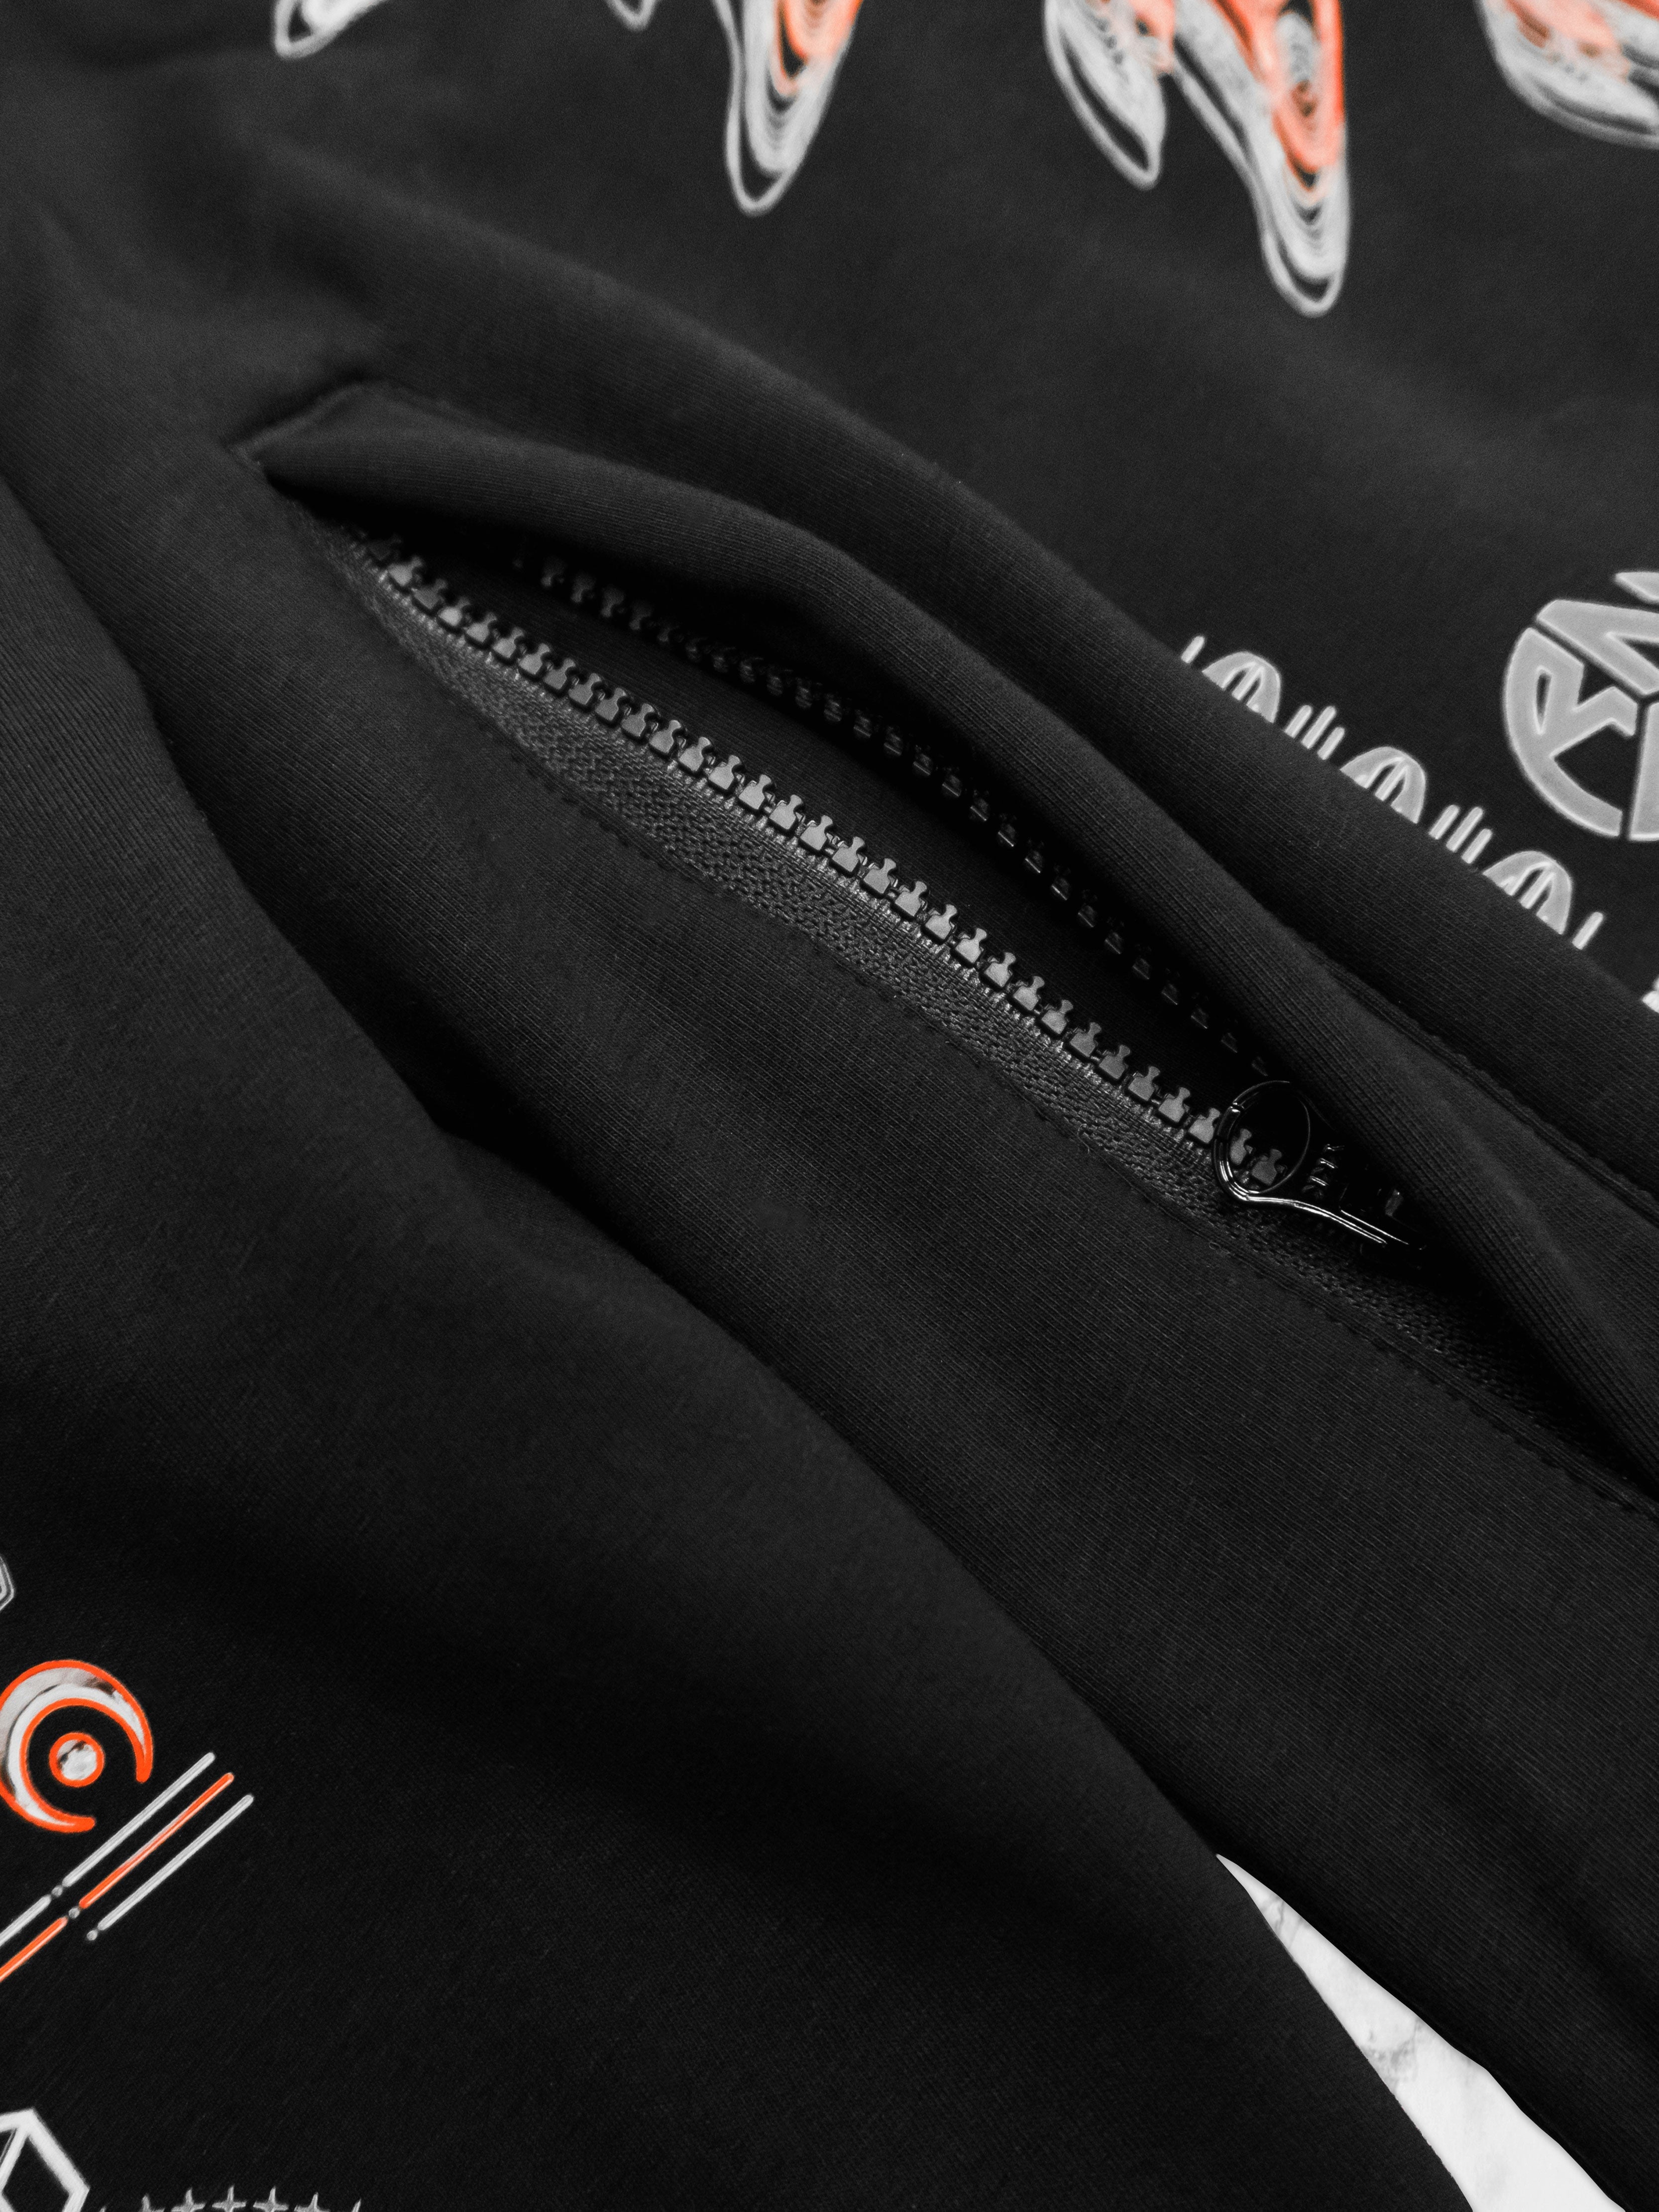 PRE-ORDER ✦ PROTECTED BY INTENT V1 ✦ Premium Hoodie Coming Soon 